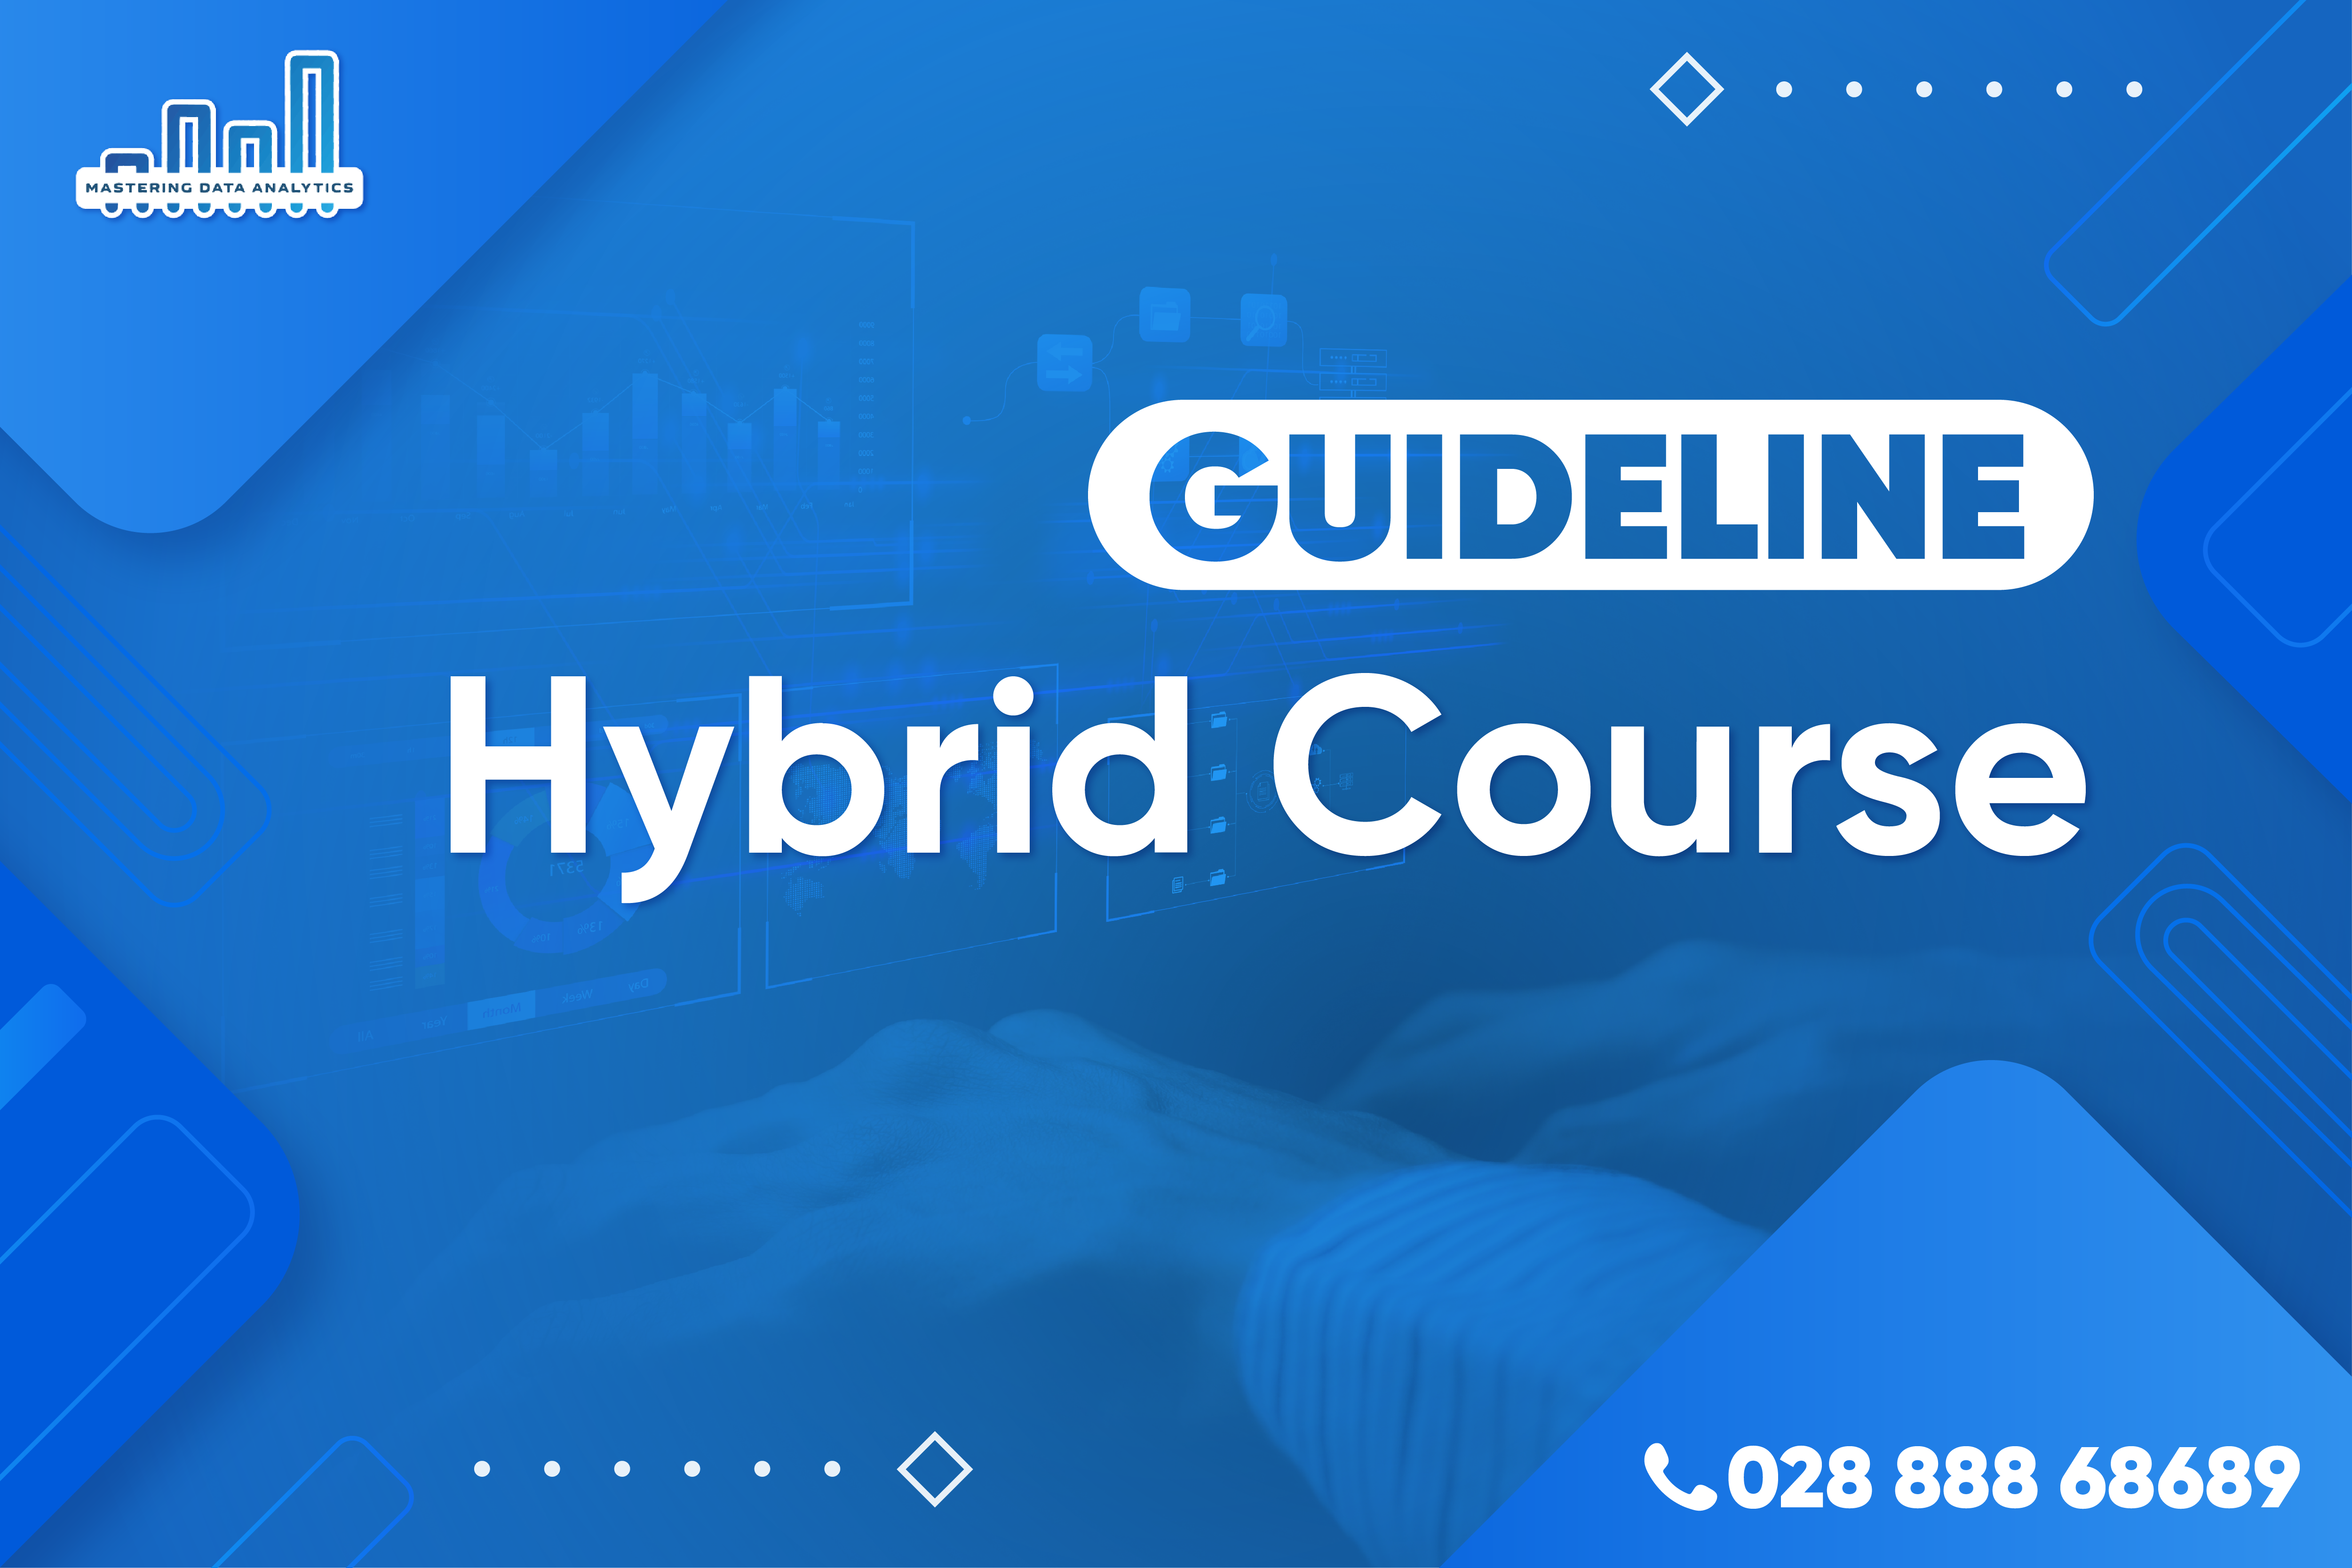 [GUIDELINE] HYBRID COURSE